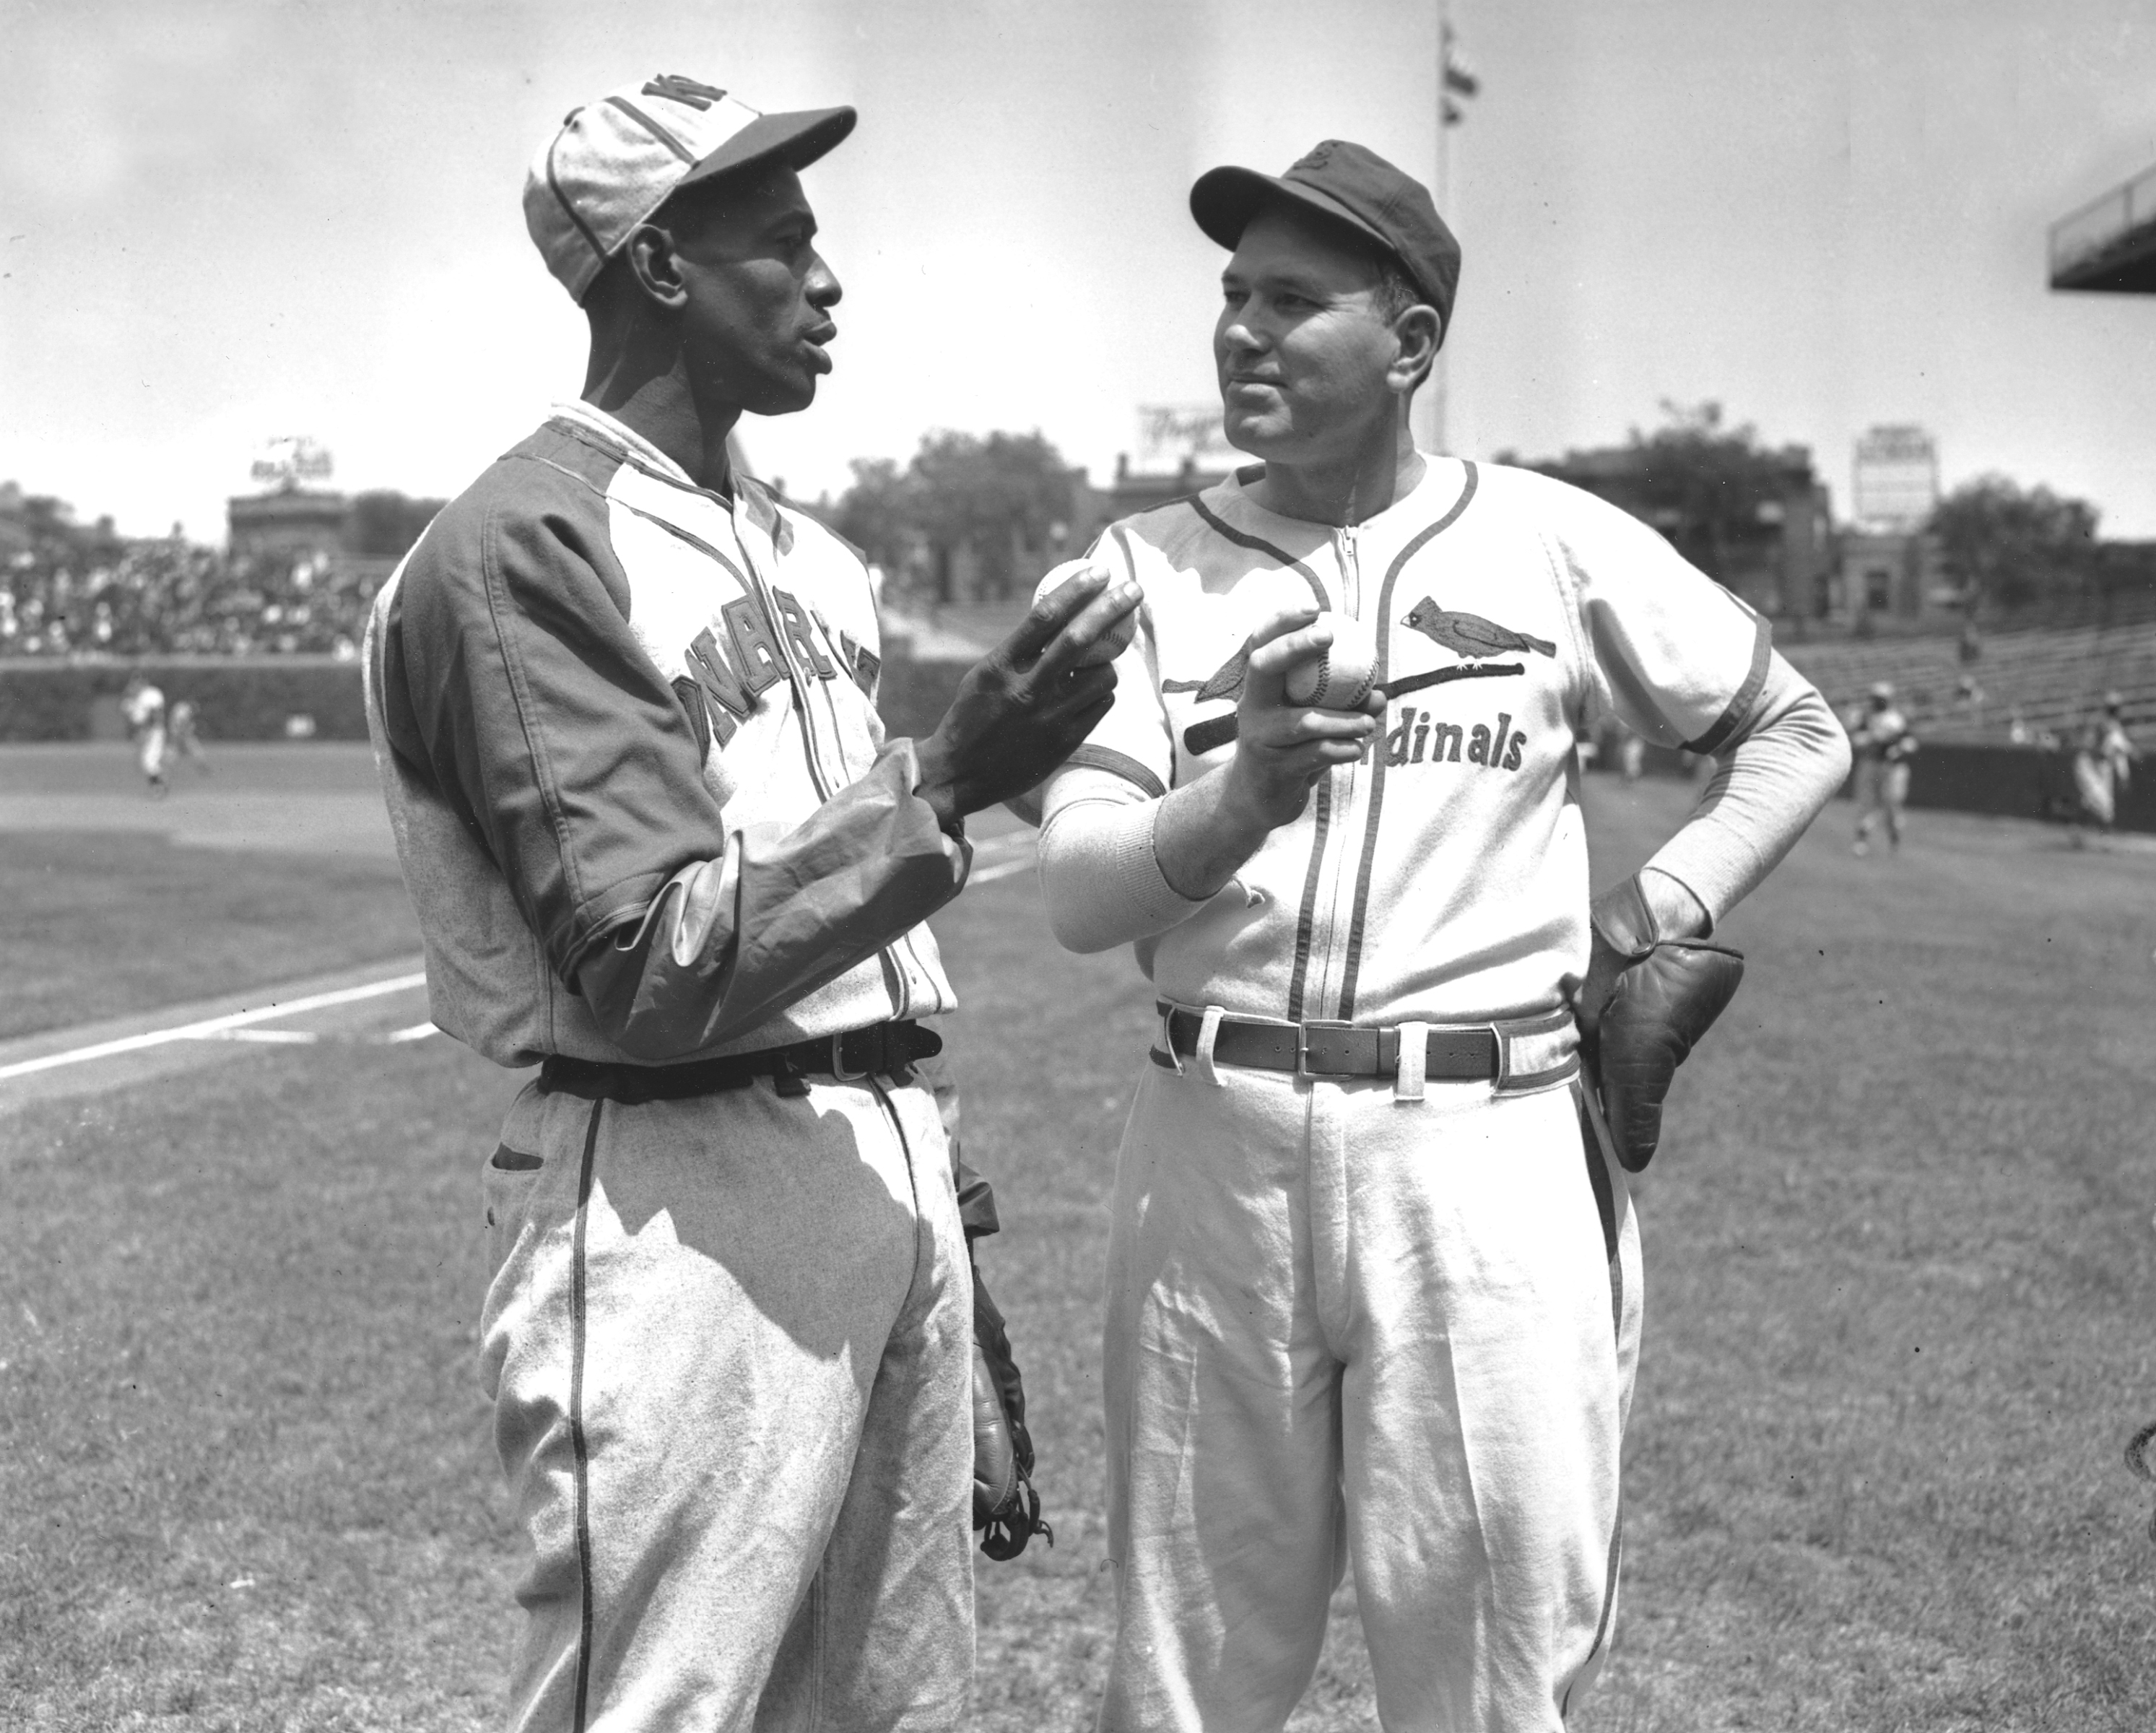 Satchel Paige of the Kansas City Monarchs (L) and former St. Louis Cardinal and Chicago Cubs hurler Dizzy Dean discuss pitching techniques before the start of a game at Wrigley Field in Chicago on May 24, 1942, between Dean's All-Stars and the Monarchs, an African-American team.